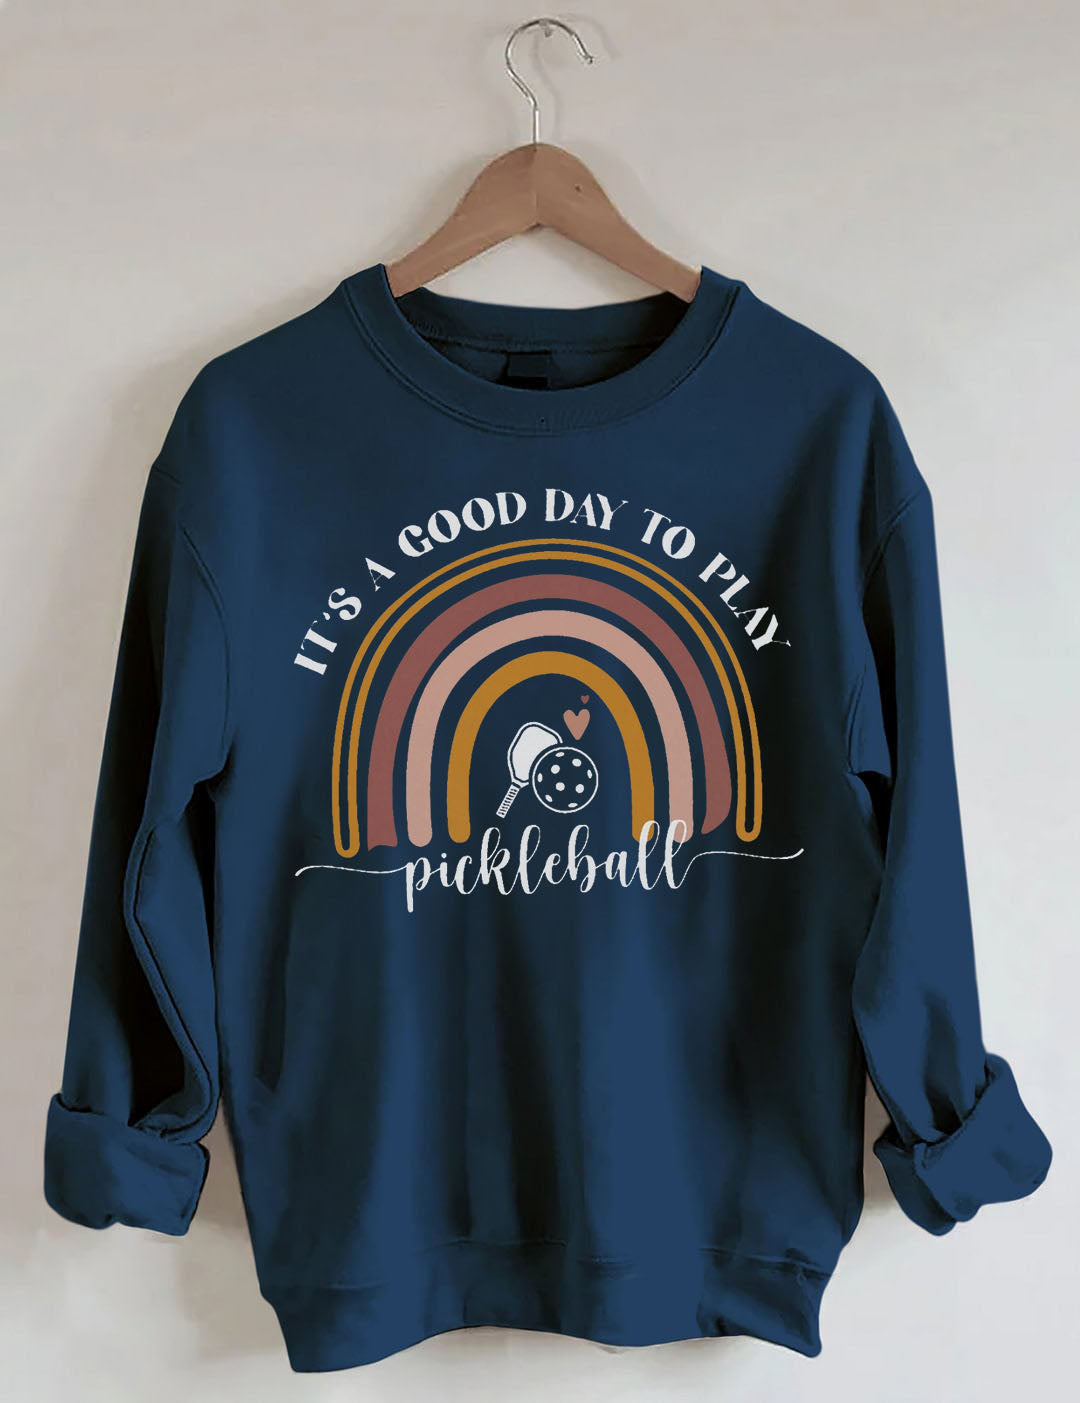 It's A Good Day To Play Pickleball Sweatshirt